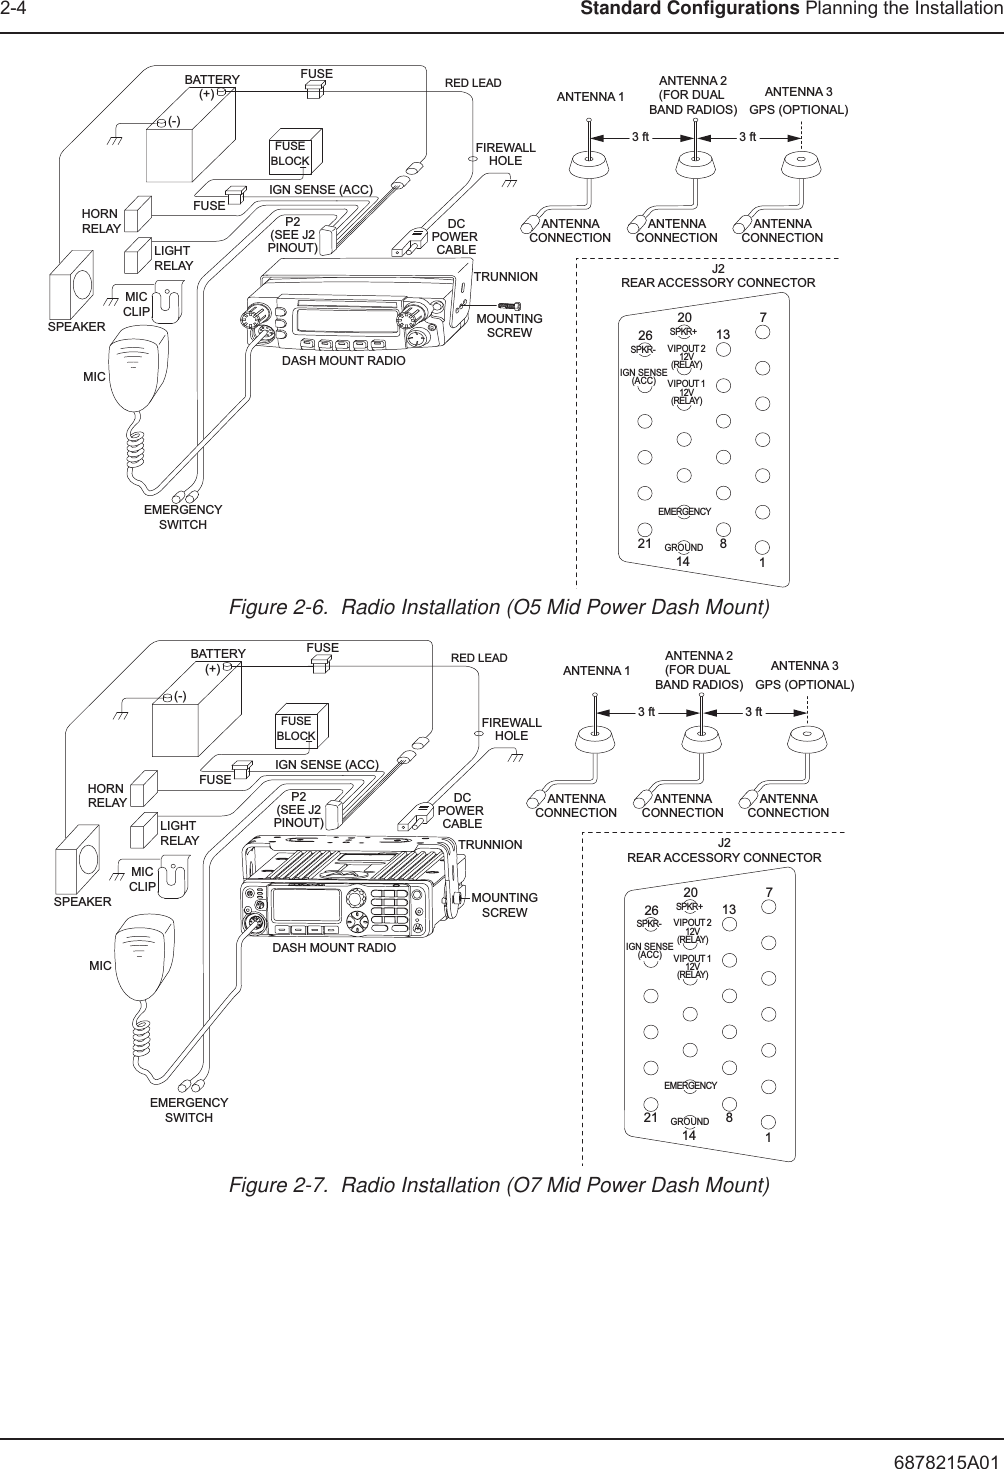 6878215A012-4 Standard Configurations Planning the InstallationFigure 2-6.  Radio Installation (O5 Mid Power Dash Mount)Figure 2-7.  Radio Installation (O7 Mid Power Dash Mount)BATTERYHORN RELAYLIGHT RELAYMICCLIPSPEAKERMICEMERGENCYSWITCHFUSEFUSEBLOCK(+)(-)RED LEADFUSEFIREWALLHOLEMOUNTINGSCREWDASH MOUNT RADIOANTENNA CONNECTION ANTENNA 13 ftIGN SENSE (ACC)P2(SEE J2PINOUT)DCPOWER CABLETRUNNION J2REAR ACCESSORY CONNECTOR1781413202126SPKR-SPKR+VIPOUT 212V(RELAY)VIPOUT 112V(RELAY)GROUNDEMERGENCYIGN SENSE(ACC)ANTENNA CONNECTION ANTENNA 2(FOR DUAL BAND RADIOS)ANTENNA CONNECTION ANTENNA 3GPS (OPTIONAL)3 ftBATTERYHORN RELAYLIGHT RELAYMICCLIPSPEAKERMICEMERGENCYSWITCHFUSEFUSEBLOCK(+)(-)RED LEADFUSEFIREWALLHOLEMOUNTINGSCREWDASH MOUNT RADIOANTENNA CONNECTION ANTENNA 13 ftIGN SENSE (ACC)P2(SEE J2PINOUT)DCPOWER CABLETRUNNION J2REAR ACCESSORY CONNECTOR1781413202126SPKR-SPKR+VIPOUT 212V(RELAY)VIPOUT 112V(RELAY)GROUNDEMERGENCYIGN SENSE(ACC)ANTENNA CONNECTION ANTENNA 2(FOR DUAL BAND RADIOS)ANTENNA CONNECTION ANTENNA 3GPS (OPTIONAL)3 ft